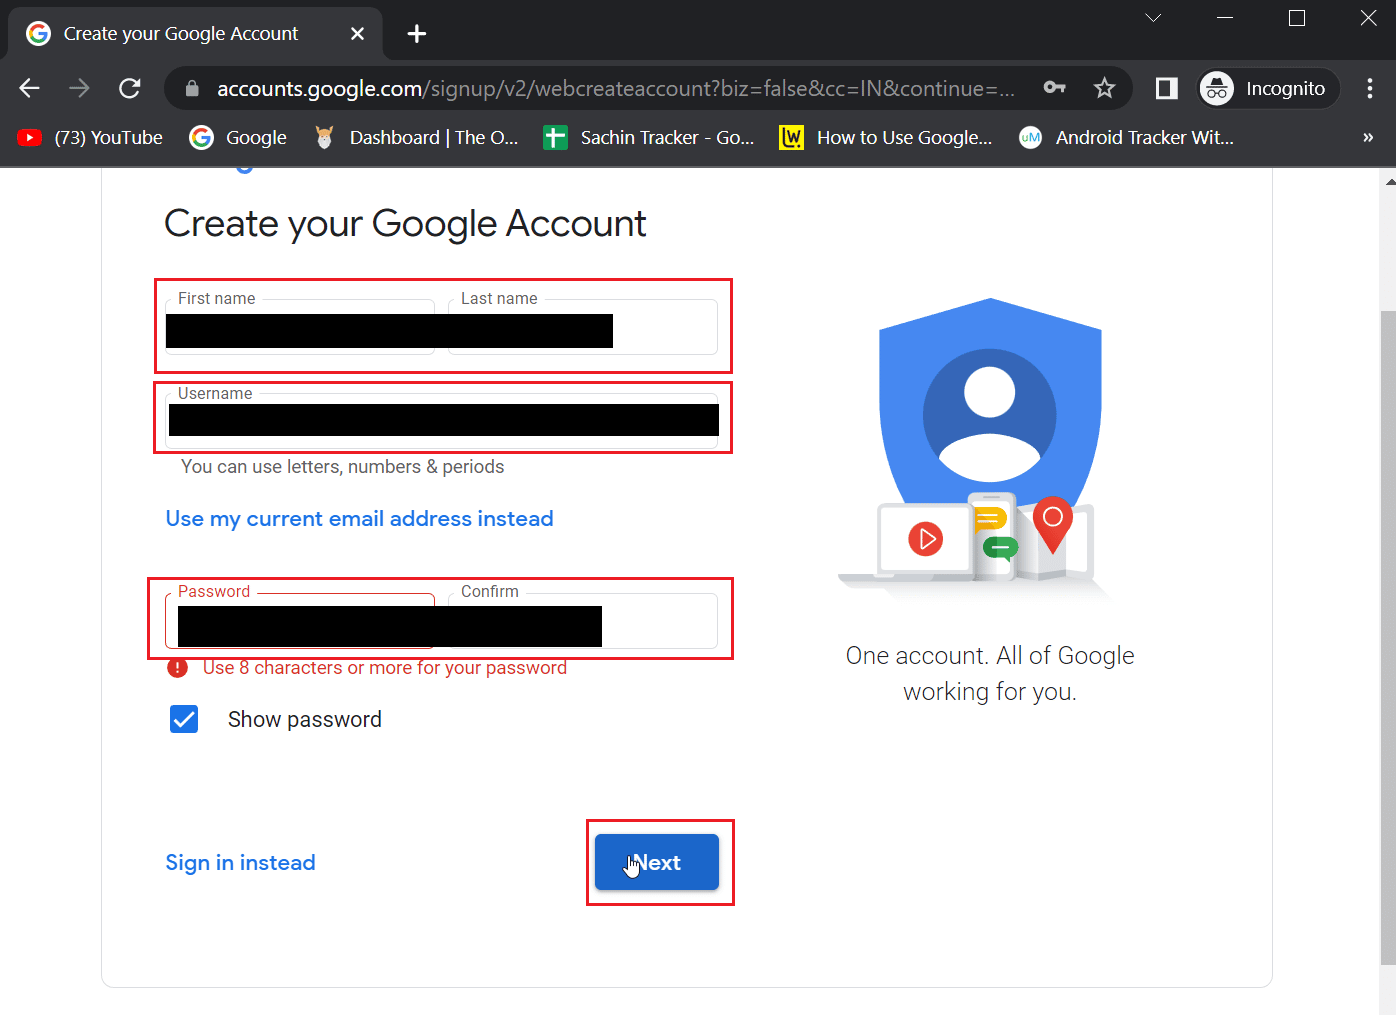 Click on the Next button to begin creating an account